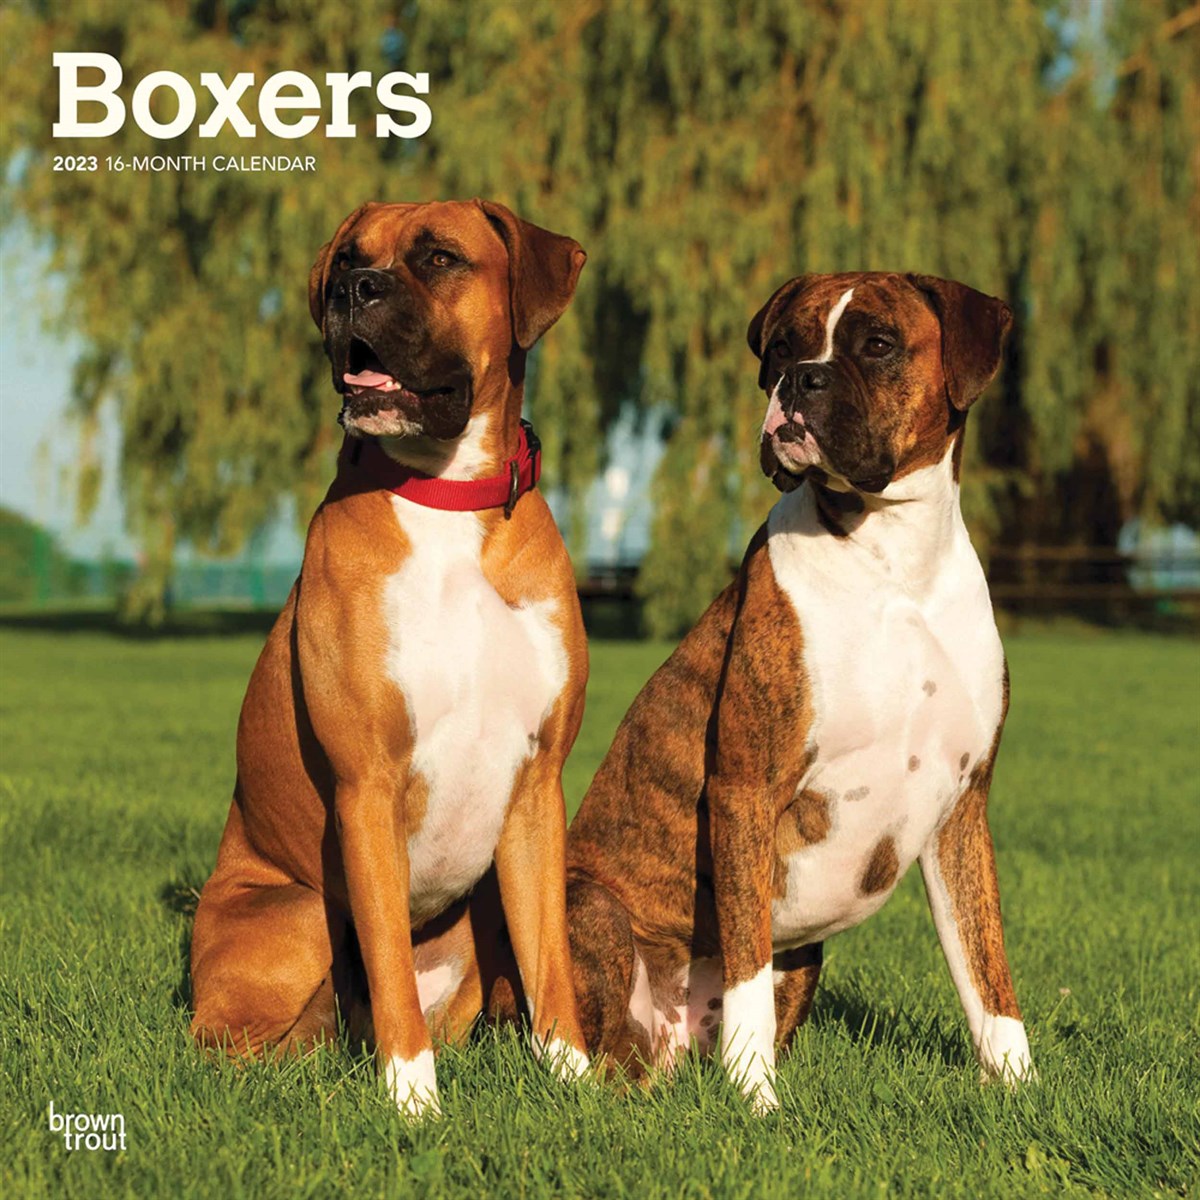 are male or female boxer dogs better